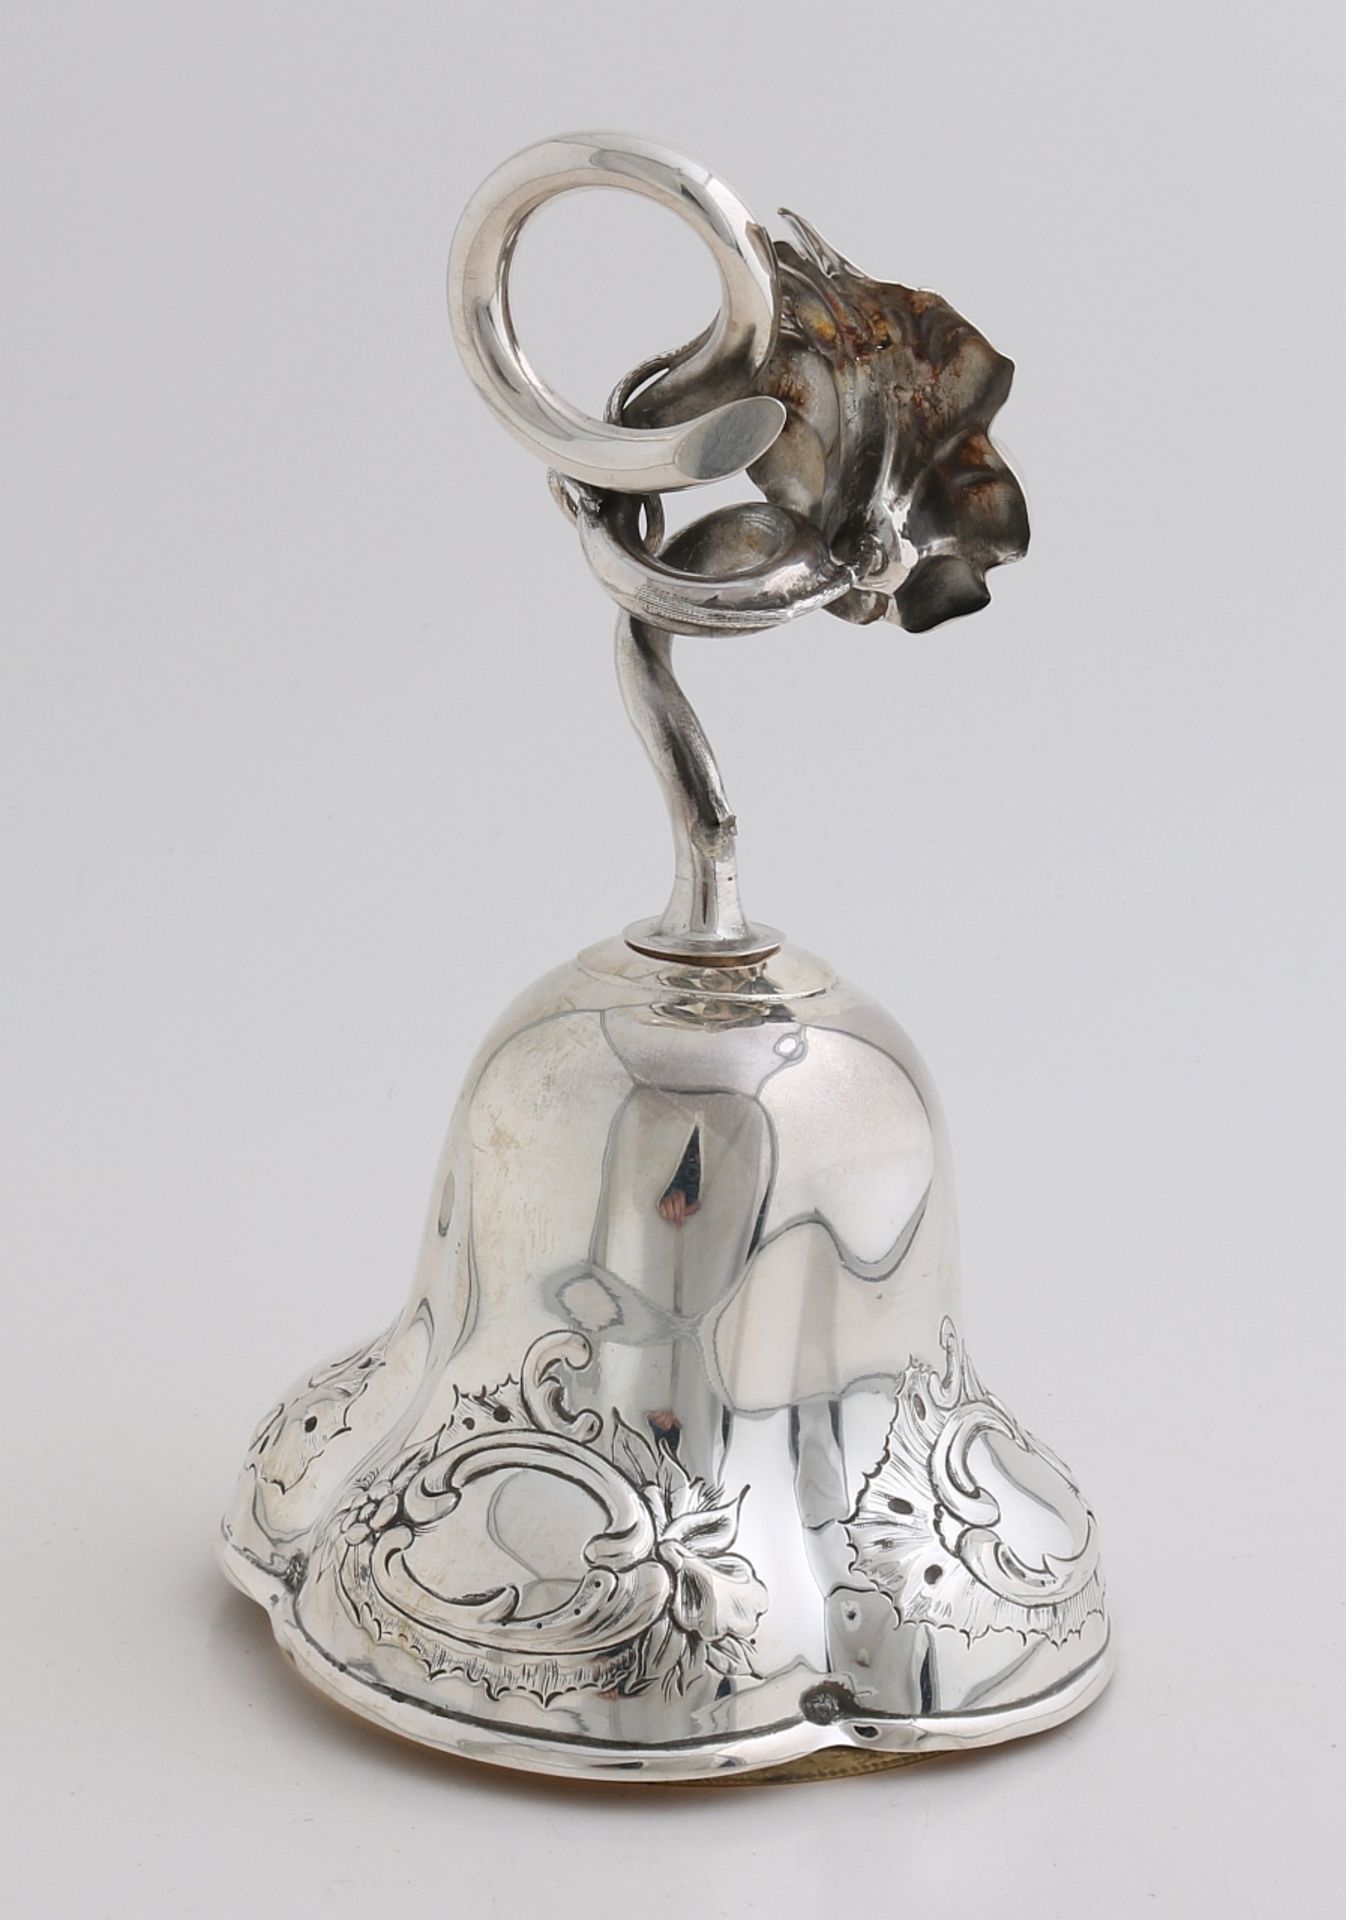 Silver table bell, 1870 - Image 2 of 2